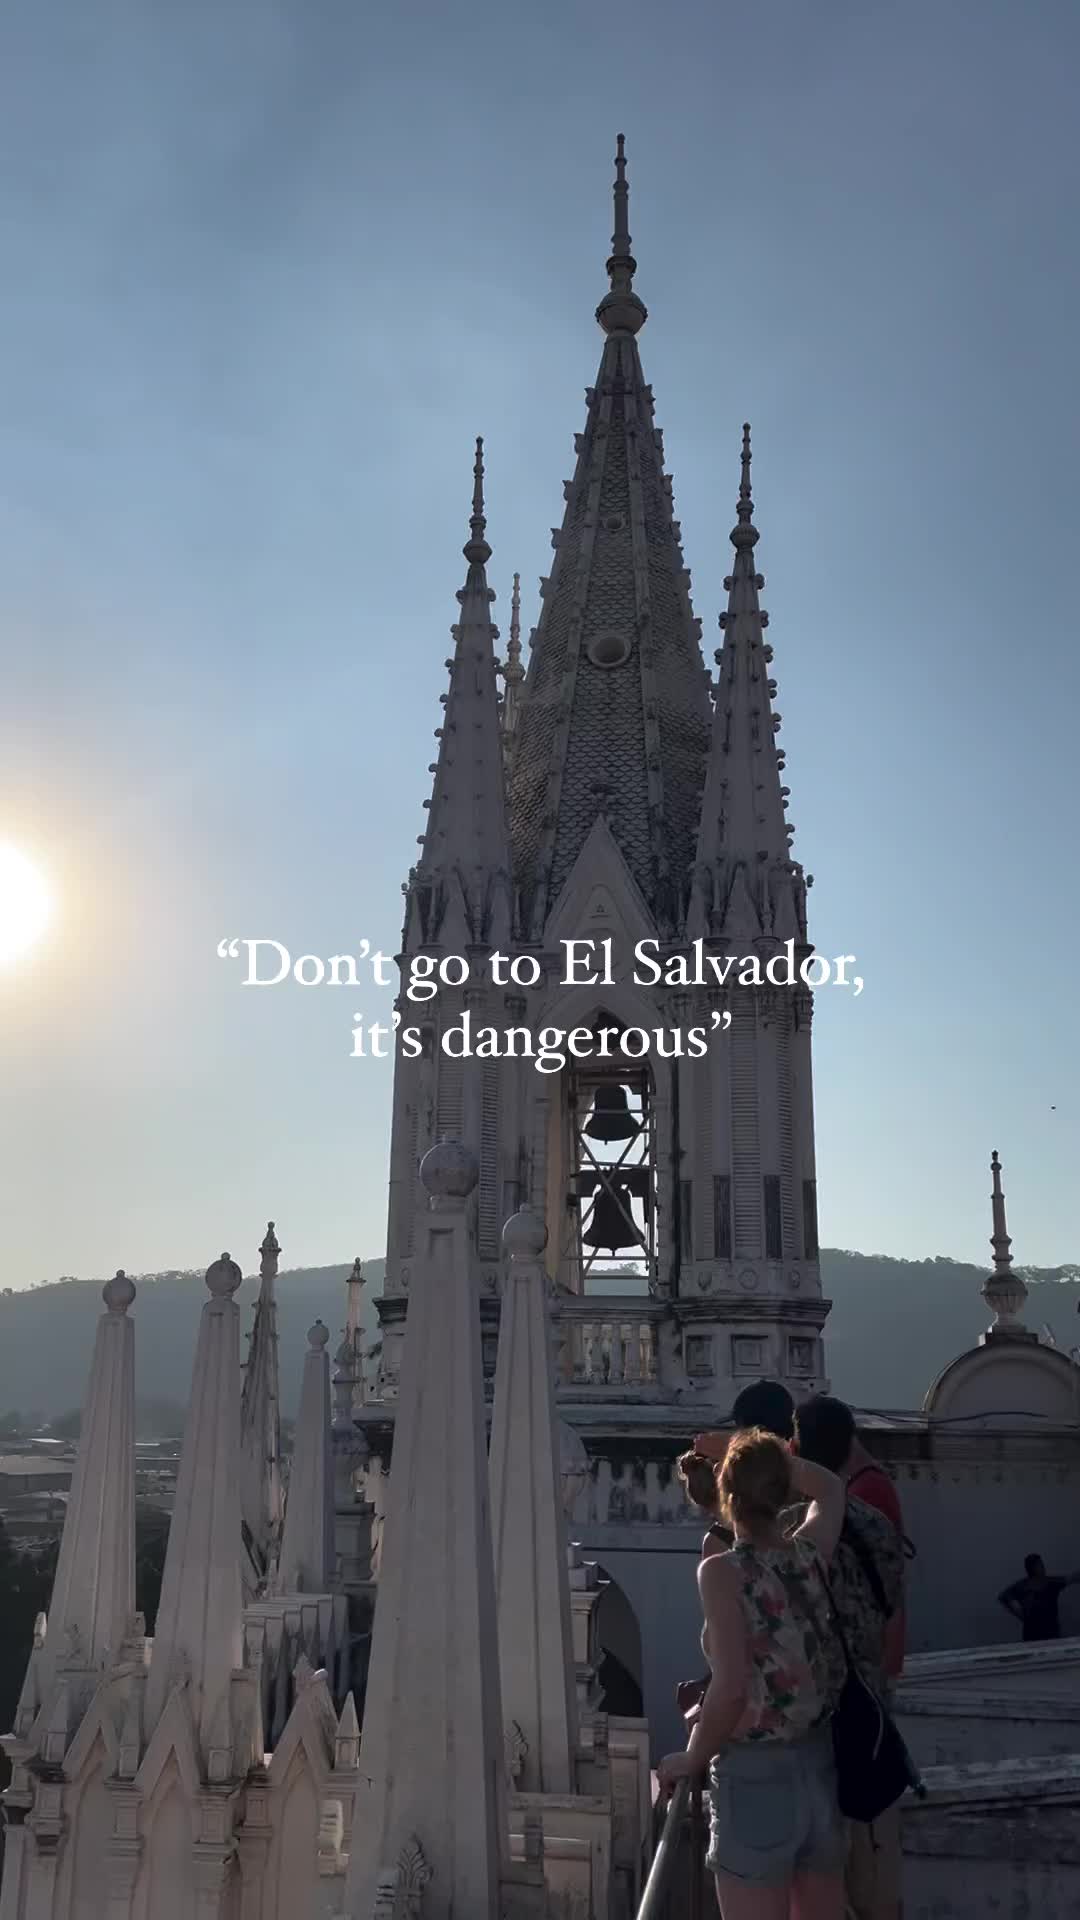 El Salvador: From Dangerous to One of the Safest Countries